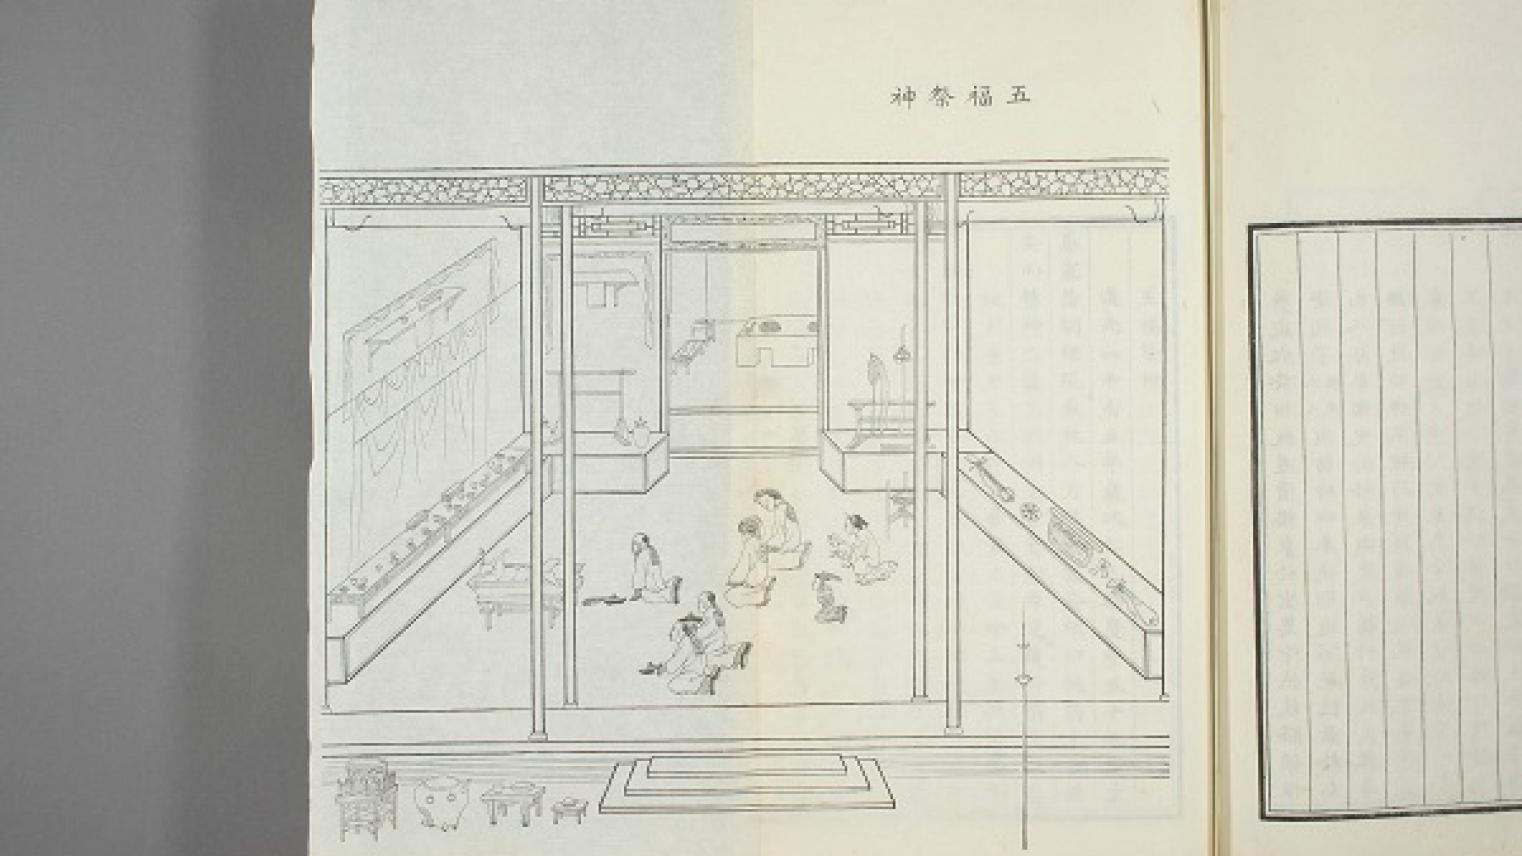 Woodblock illustration from Tracks No. 238, ‘A Sacrifice to the Gods in the Hall of Five Blessings’ 五福祭神 by Chen Jian 陳鑒 (Langzhai 朗齋)